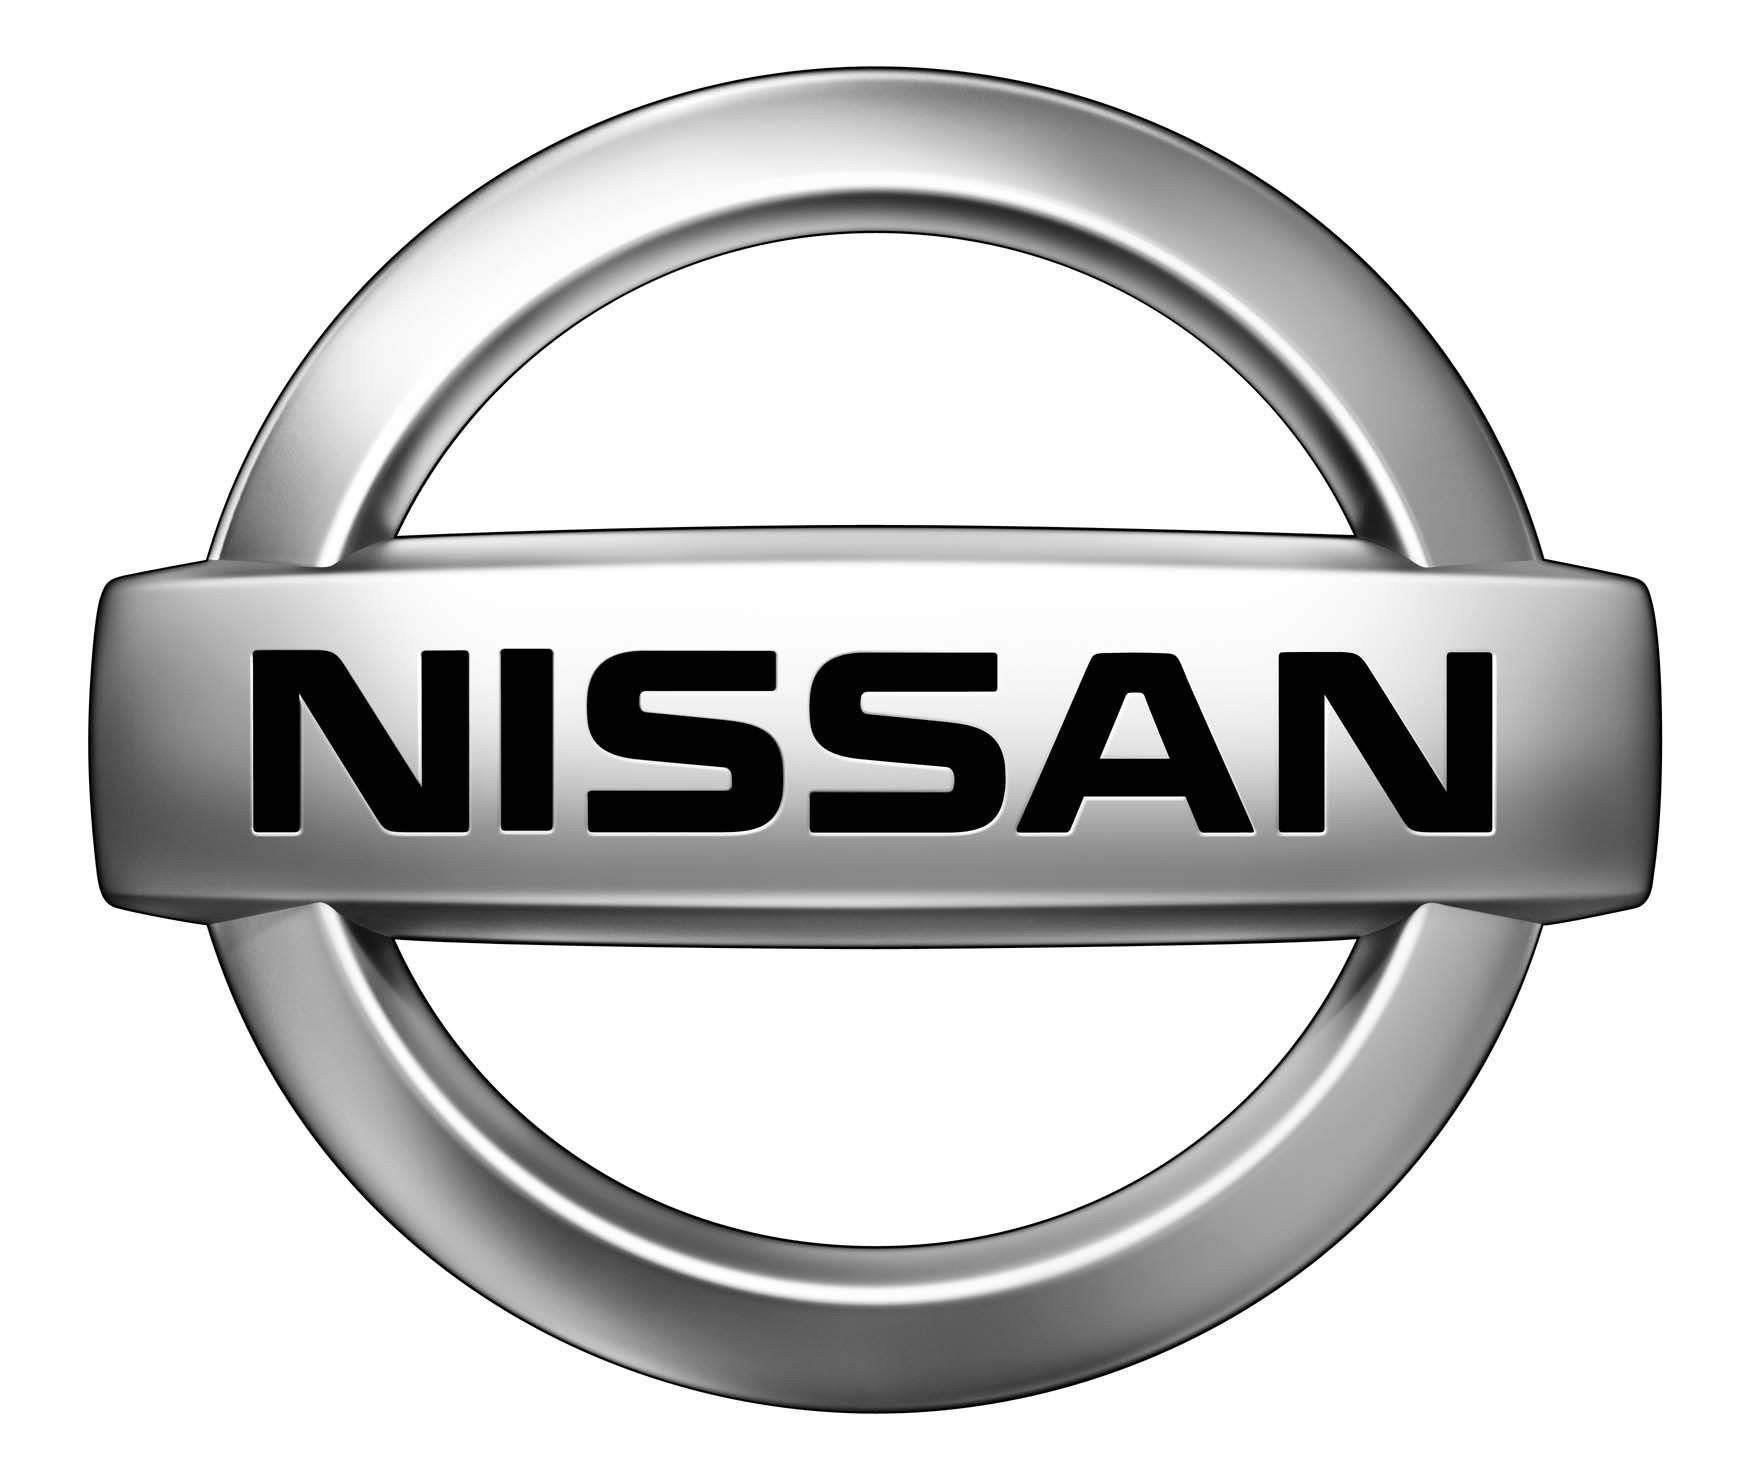 Welcome to the official page of #Vibrant #Nissan, an authorized sales and service dealership. It has been in the business since 2011 in #Hyderabad, #Telangana.